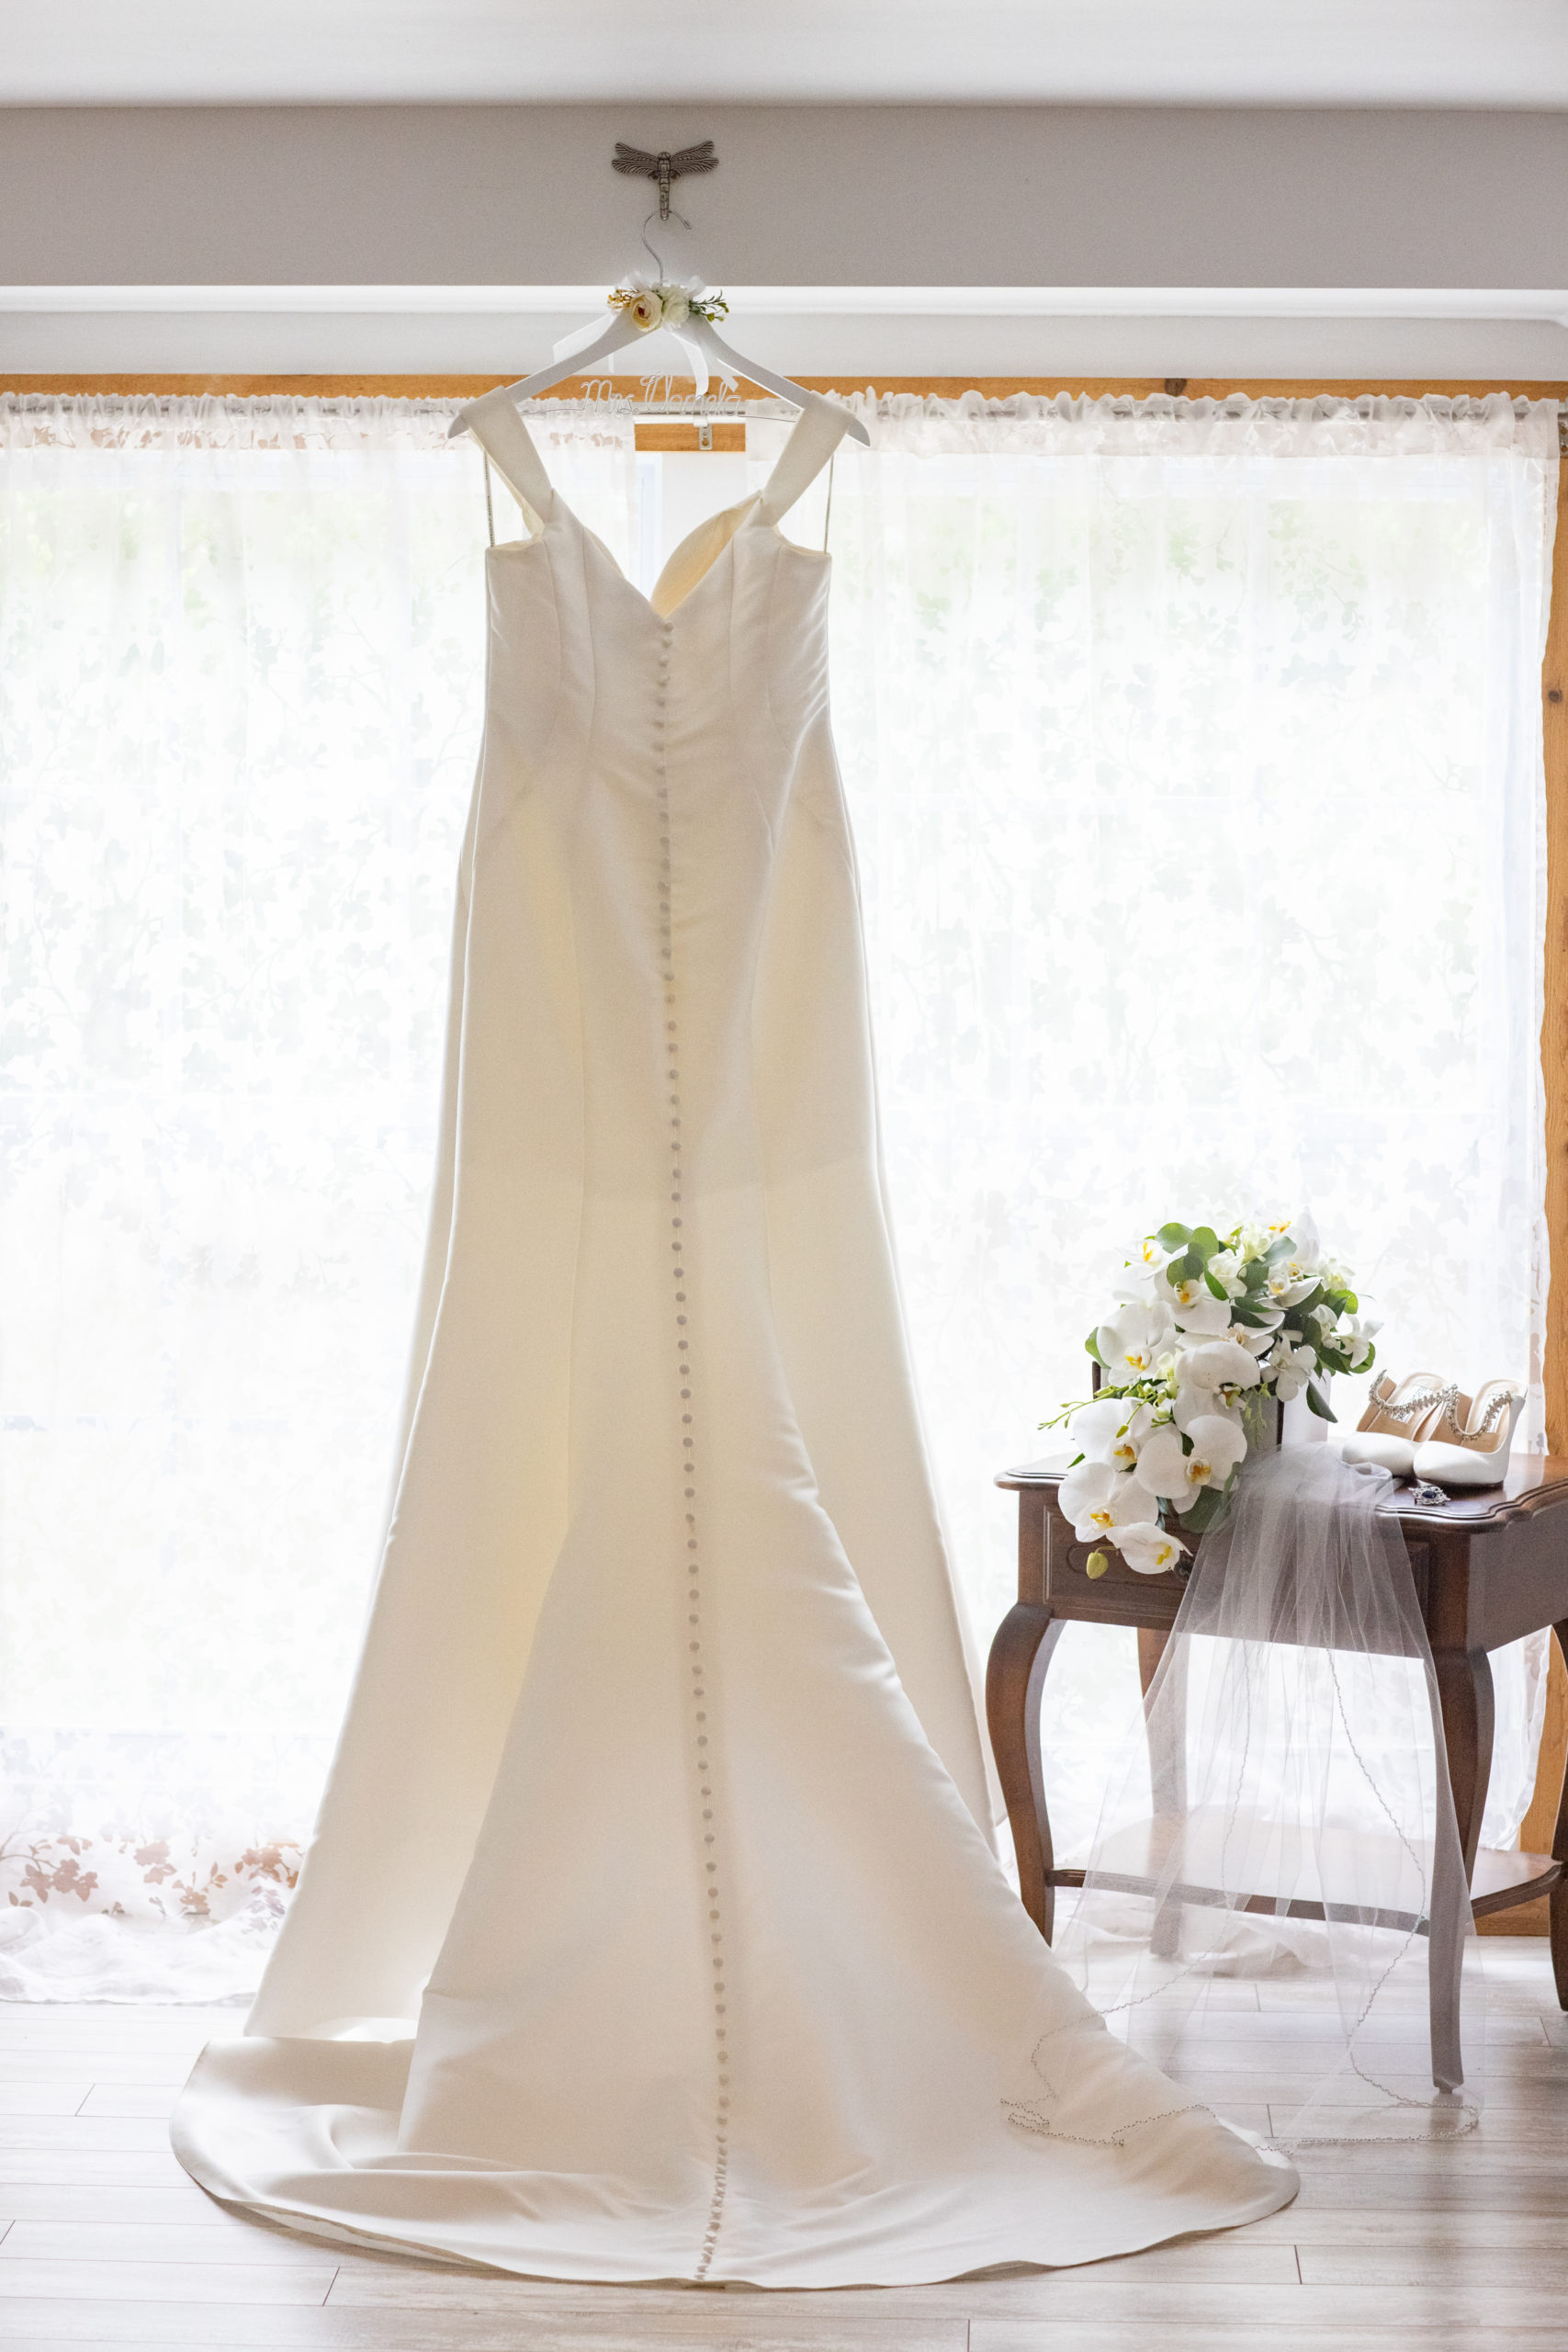 off white wedding gown with buttons down the back hanging in front of a window with lace curtains at Magnolia Manor in Vero Beach Fl 